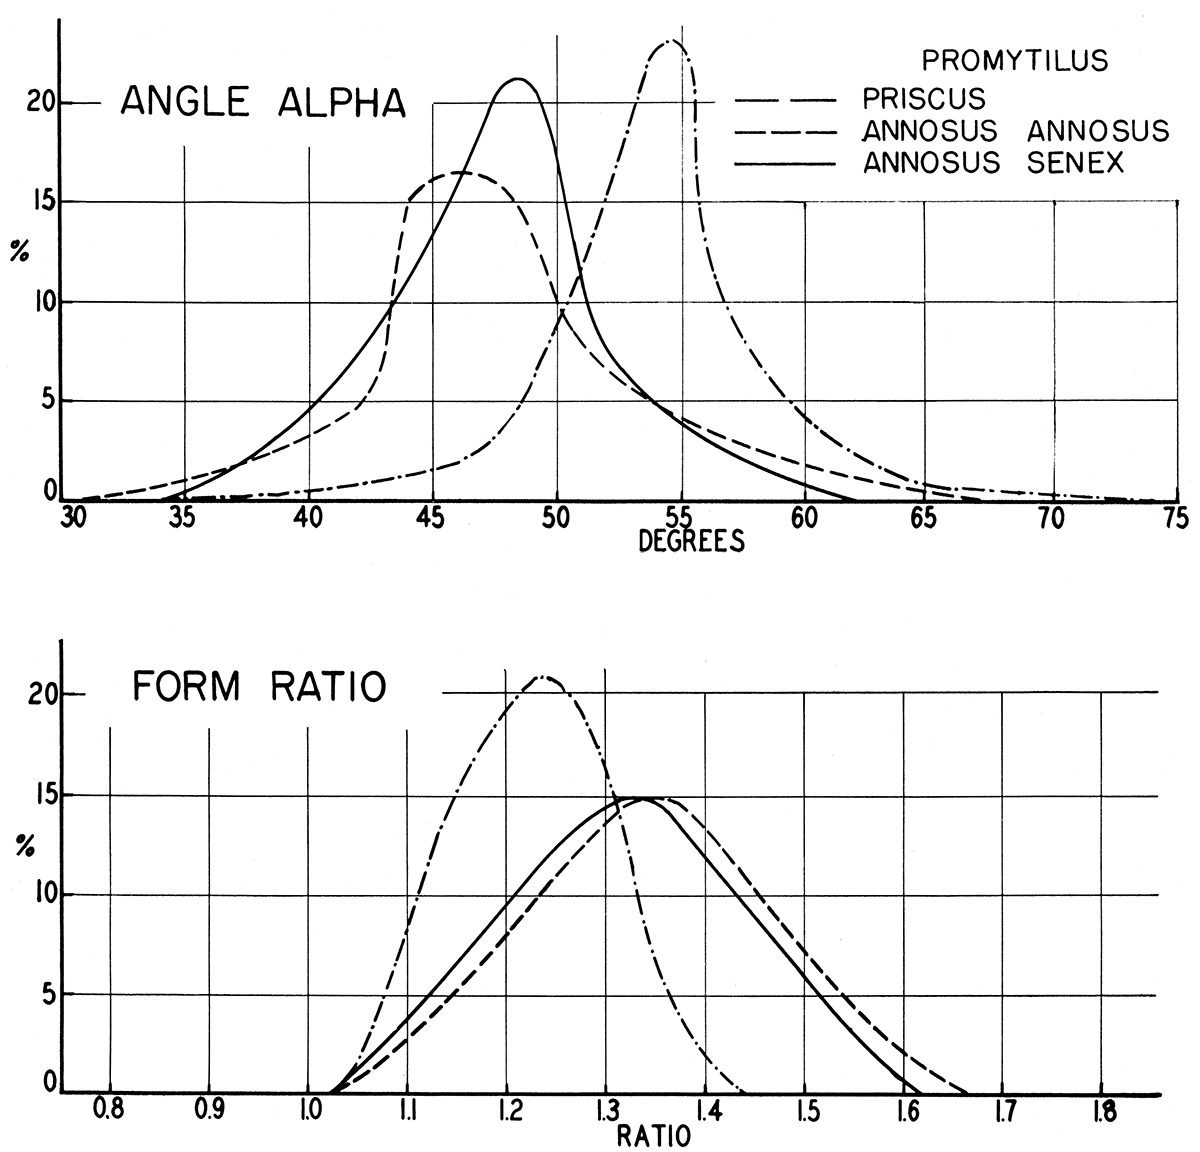 Frequency graphs showing comparison of form ratio (length/height) and angle alpha (obliquity) in three Pennsylvanian forms of Promytilus.